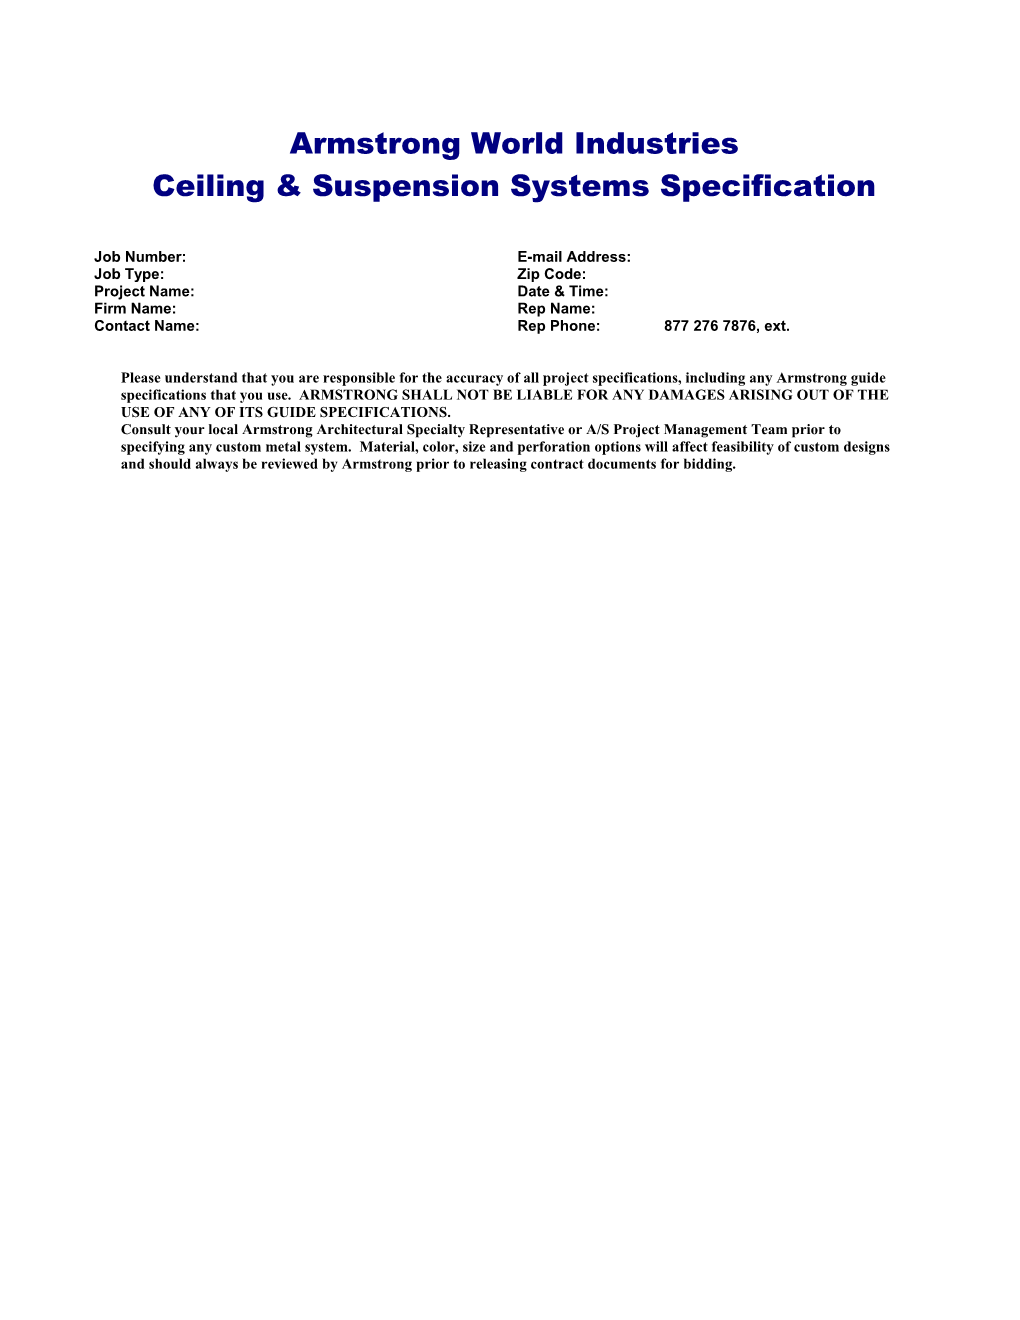 Ceiling & Suspension Systems Specification